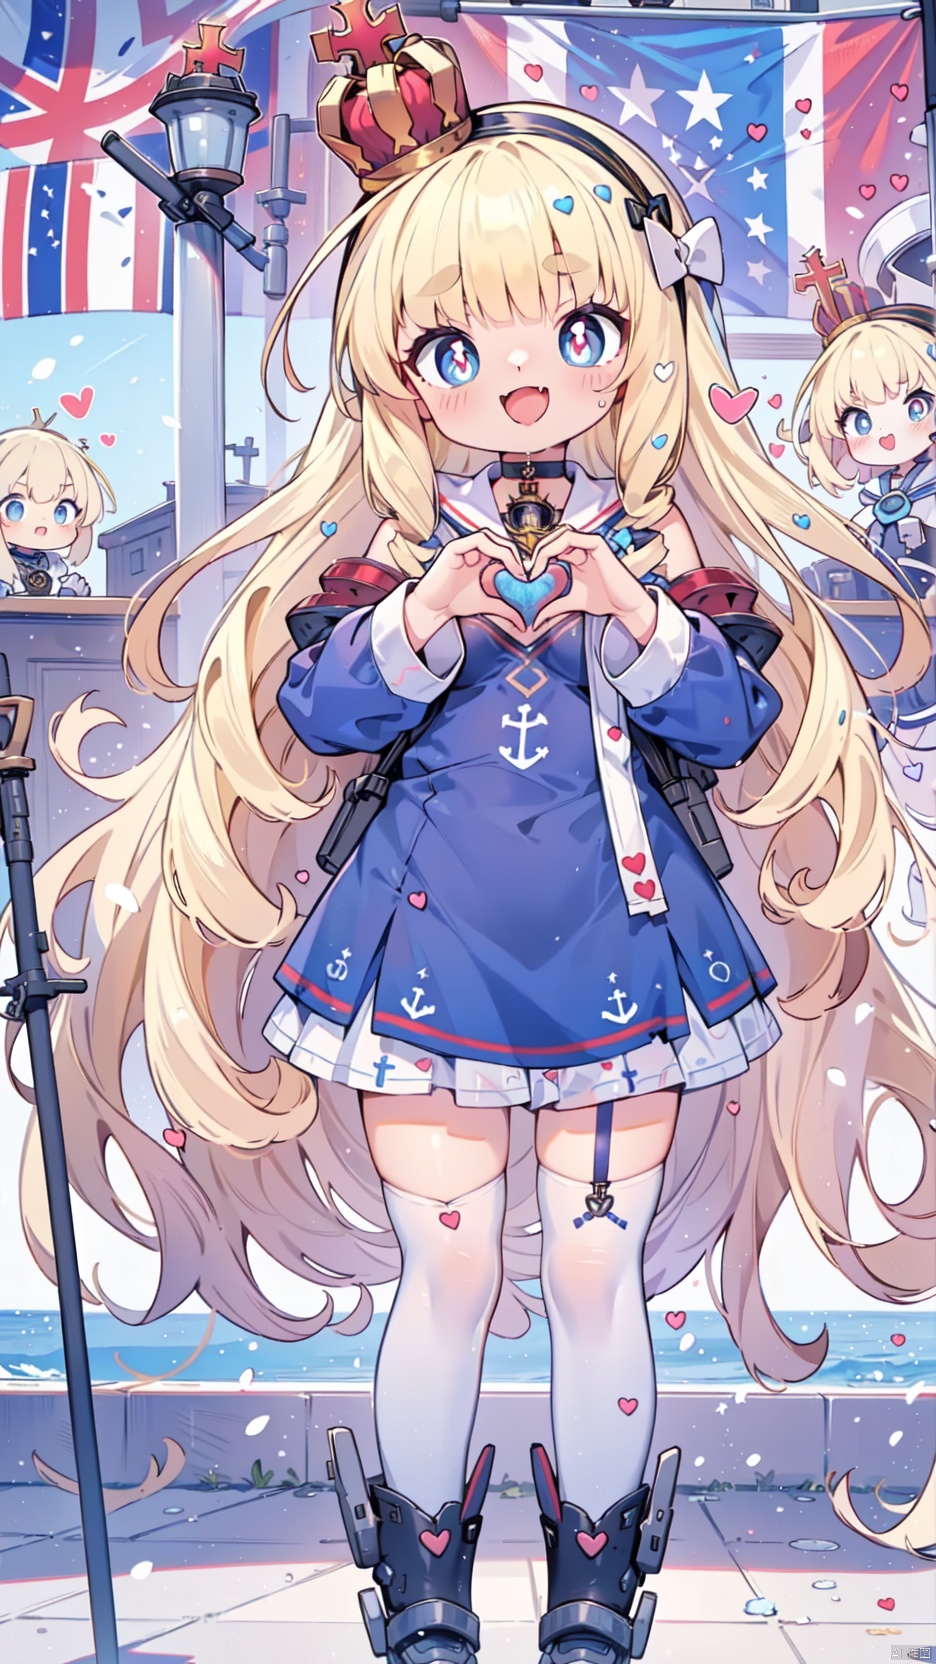  queen elizabeth (azur lane),Little girl(1.5),aged down,beautiful detailed girl,Glowing skin,steaming body,narrow waist,(very small breasts),Delicate cute face,princess crown,small crown,anchor choker,pubic tattoo,(anchor print naval uniform),ornate clothes,fine fabric emphasis,blue eyes,beautiful detailed eyes,Glowing eyes,((heart-shaped pupils)),((blonde hair)),((hair spread out,wavy hair)),very long shoulder,glowing hair,Extremely delicate hair,Thin leg,white legwear garter,black footwear,Slender fingers,steepled fingers,shiny nails,((standing,holding a flag,english flag)),ahegao(expression),smile,open mouth,tongue out,licking lips,drooling,heavy breathing,fangs out,big fangs,puffy cheeks,beautiful detailed mouth,looking at viewer,semen(ornament),warship,harbor,royal navy (emblem),hyper realistic,magic,4k,incredible quality,best quality,masterpiece,highly detailed,extremely detailed CG,cinematic lighting,light particle,backlighting,full body,high definition,detail enhancement,(perfect hands, perfect anatomy),8k_wallpaper,extreme details,colorful, shuiwa, loli, backlight